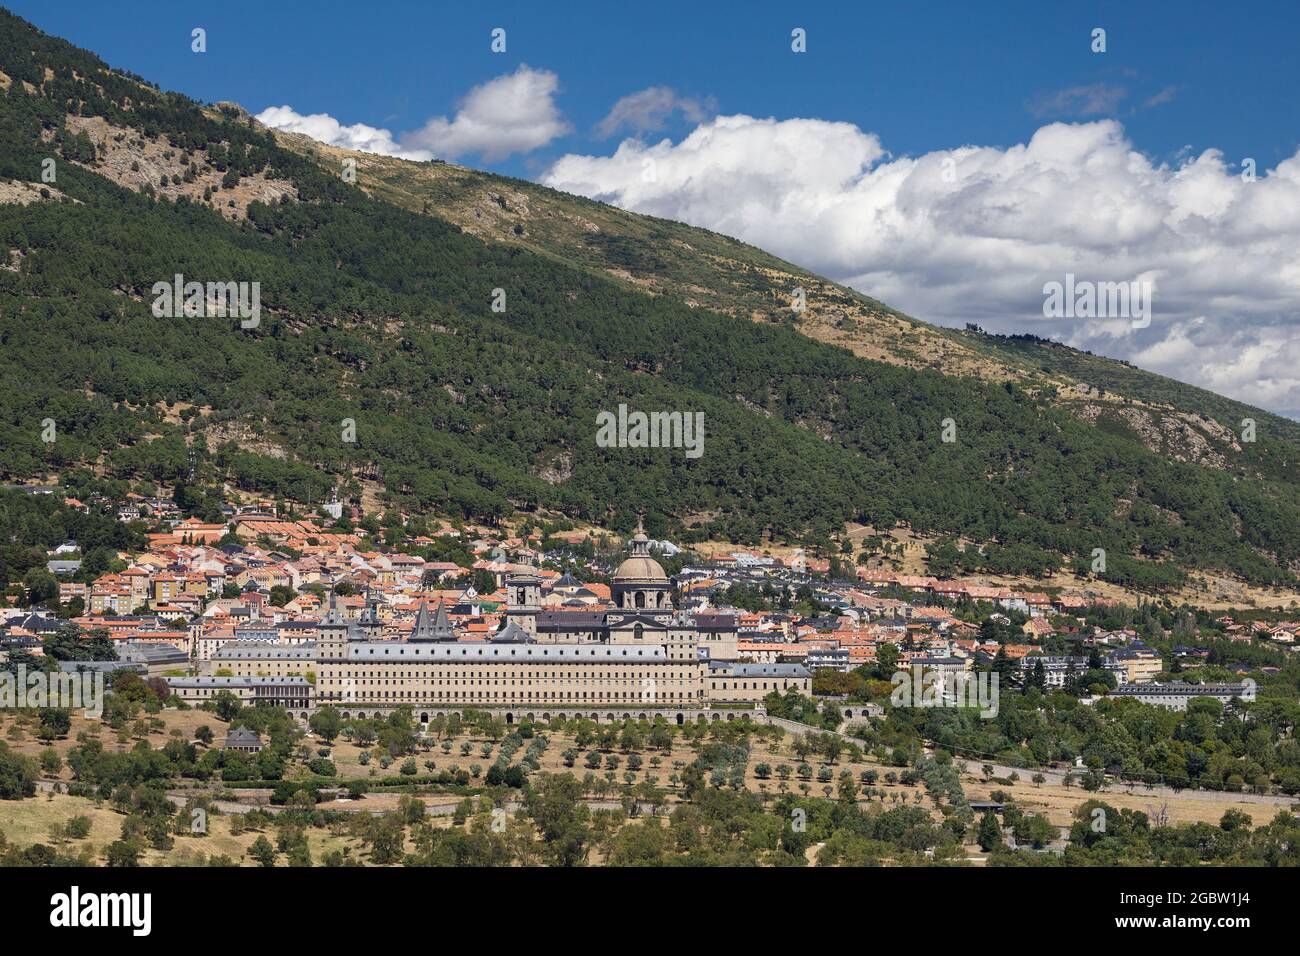 Town and Monastery of El Escorial, Madrid, Spain. Stock Photo